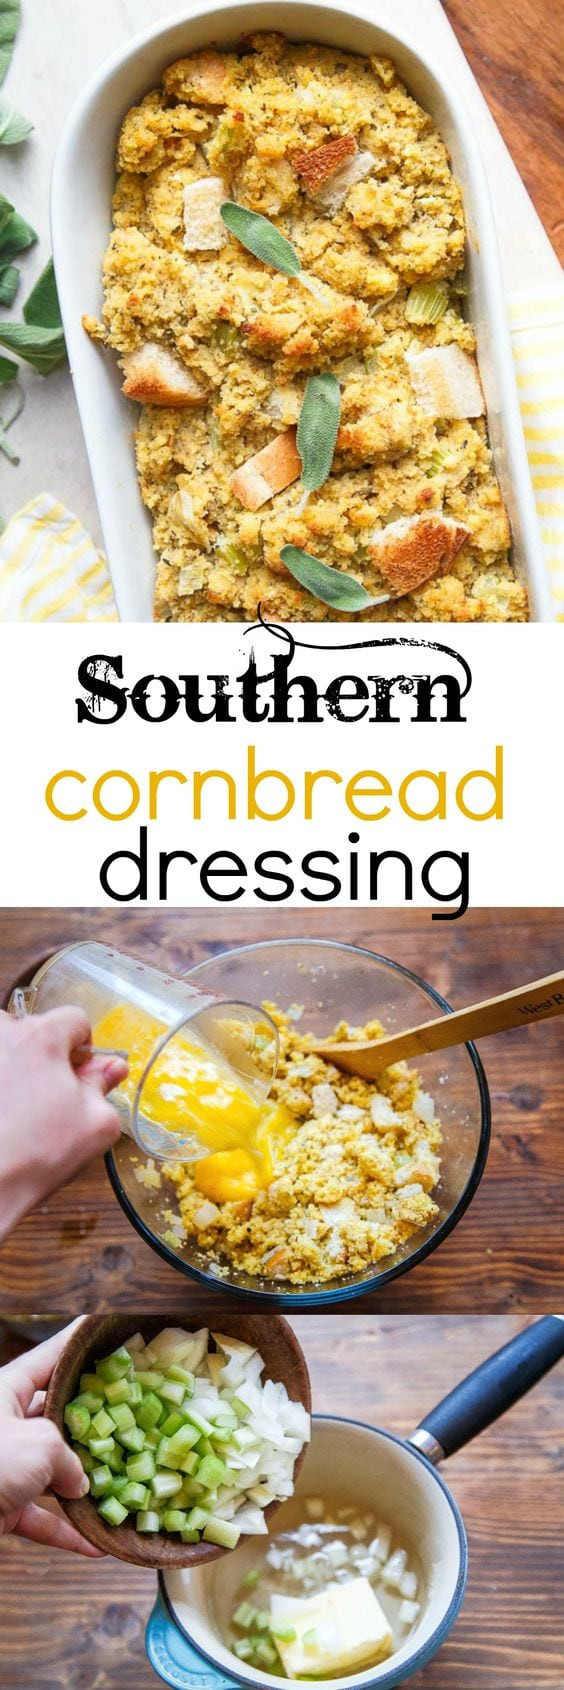 Southern Cornbread Dressing Recipes
 Southern Cornbread Dressing Recipe Classic Southern Dressing